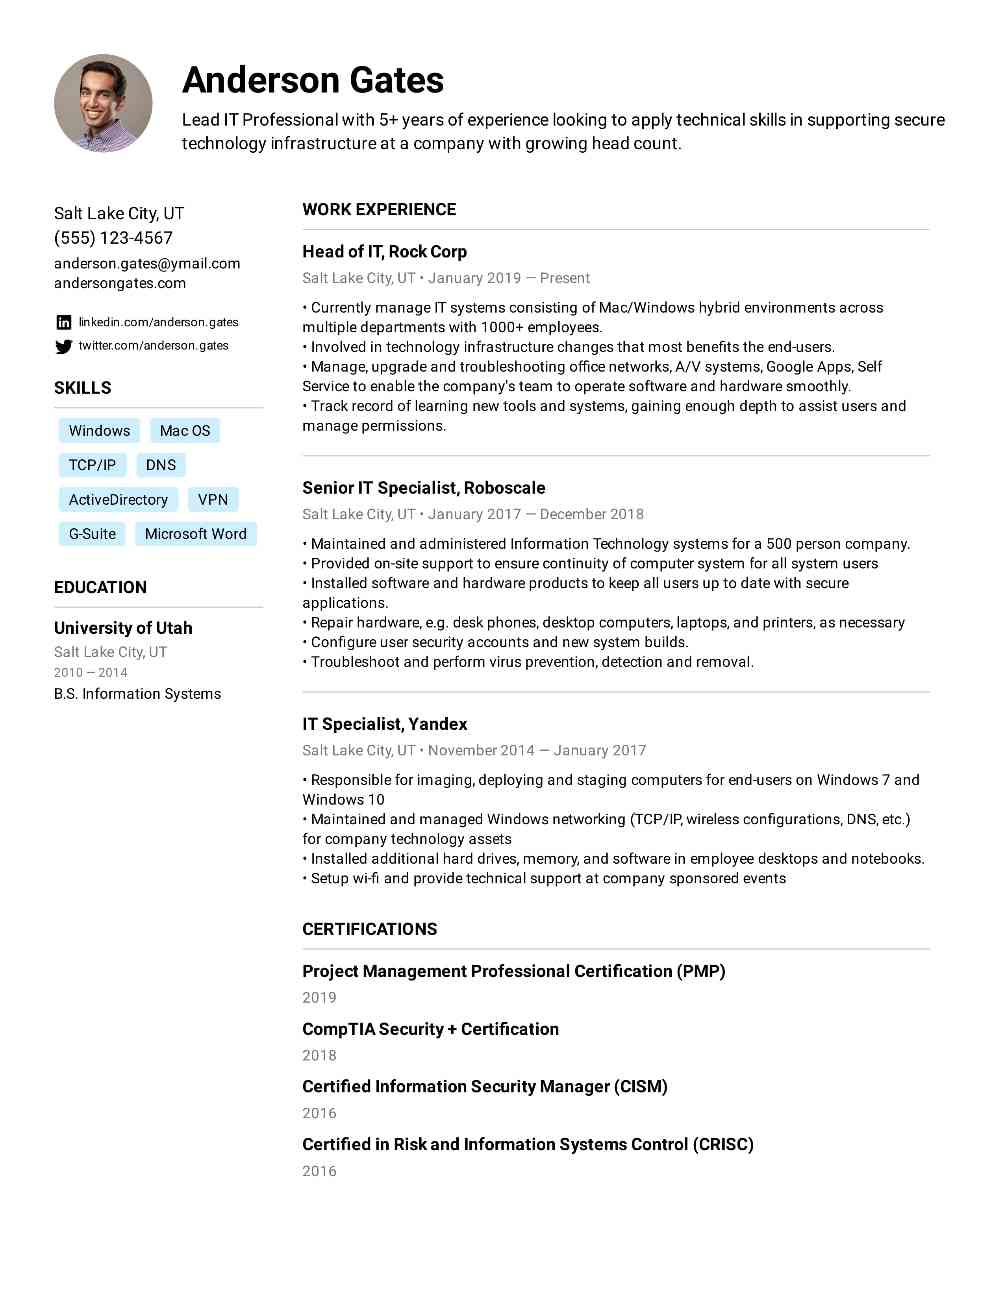 skills and certificates in resume